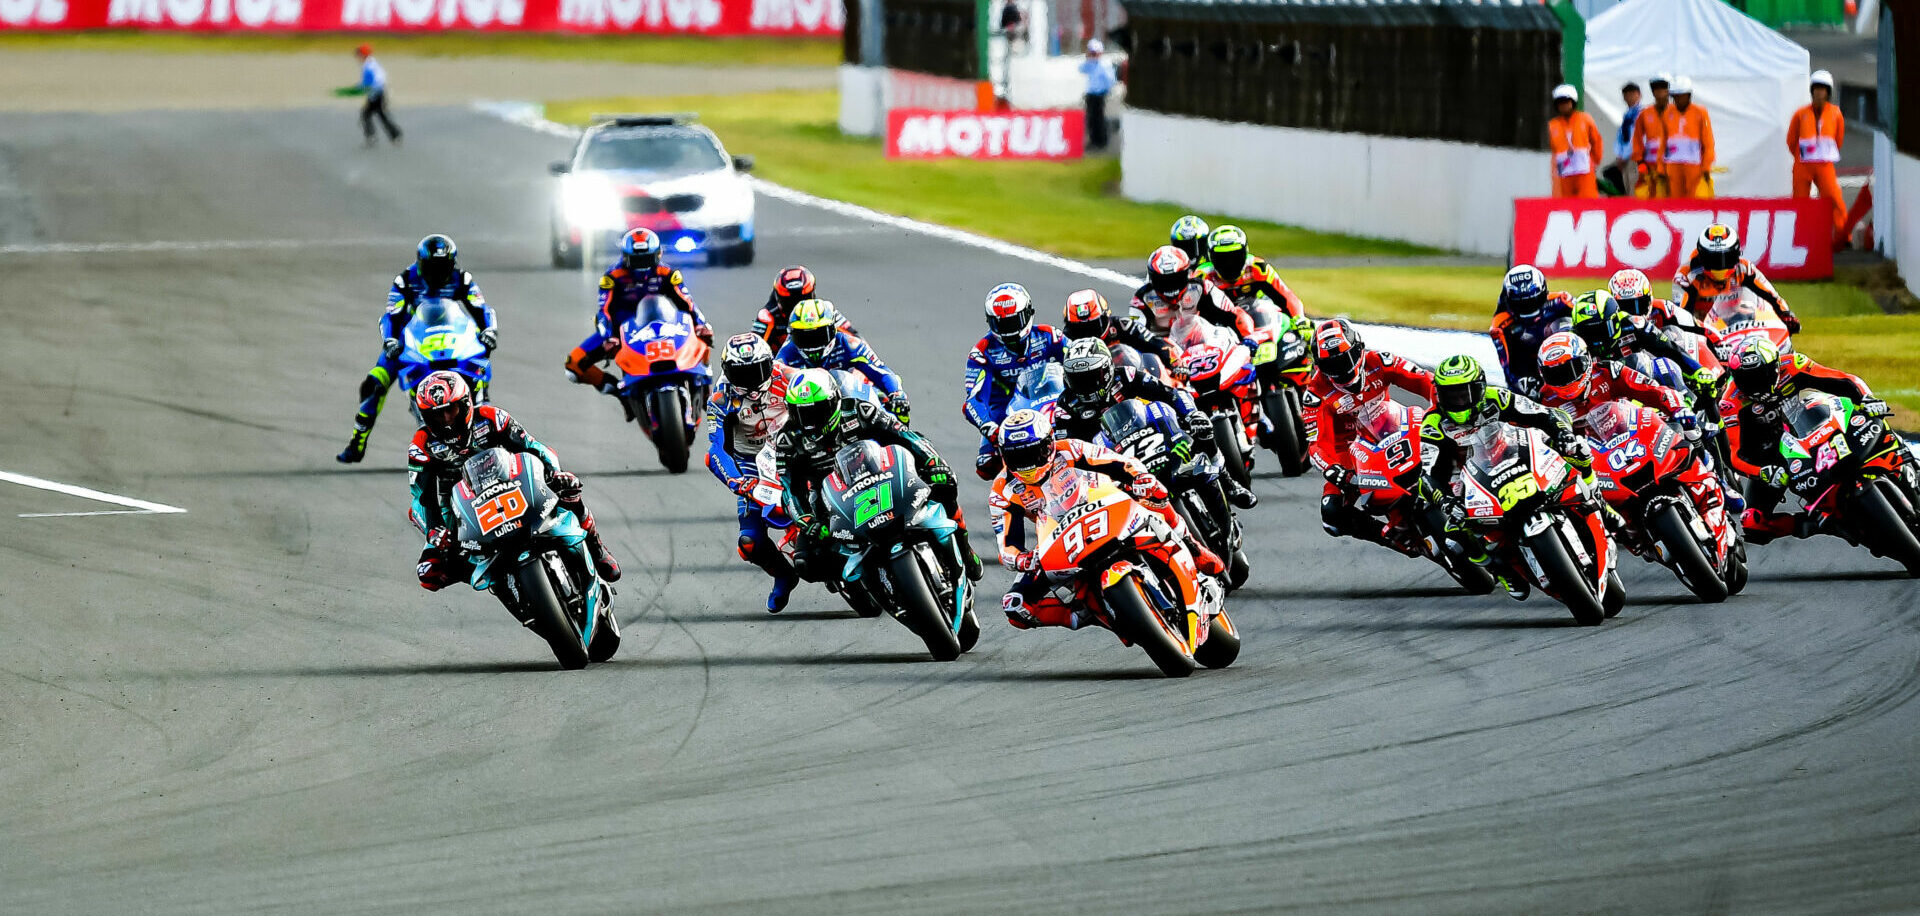 The start of the MotoGP race at Motegi in 2019, the last time MotoGP raced at the Japanese track. Photo by Kohei Hirota.